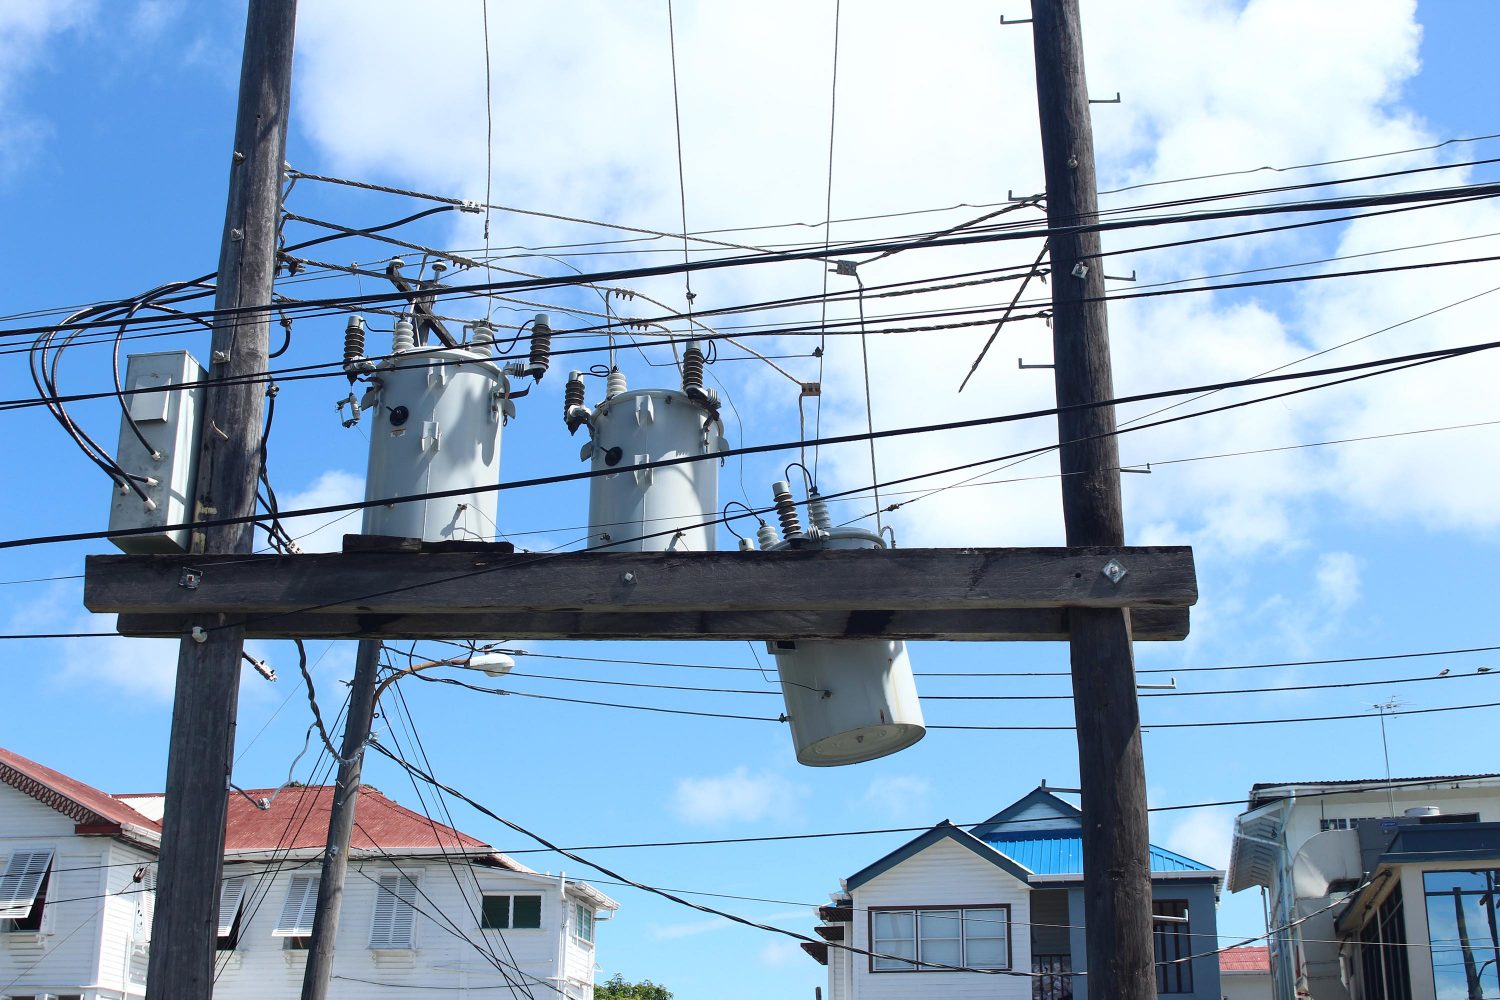 A transformer was dislodged after the car slammed into utility posts as a result of the collision.